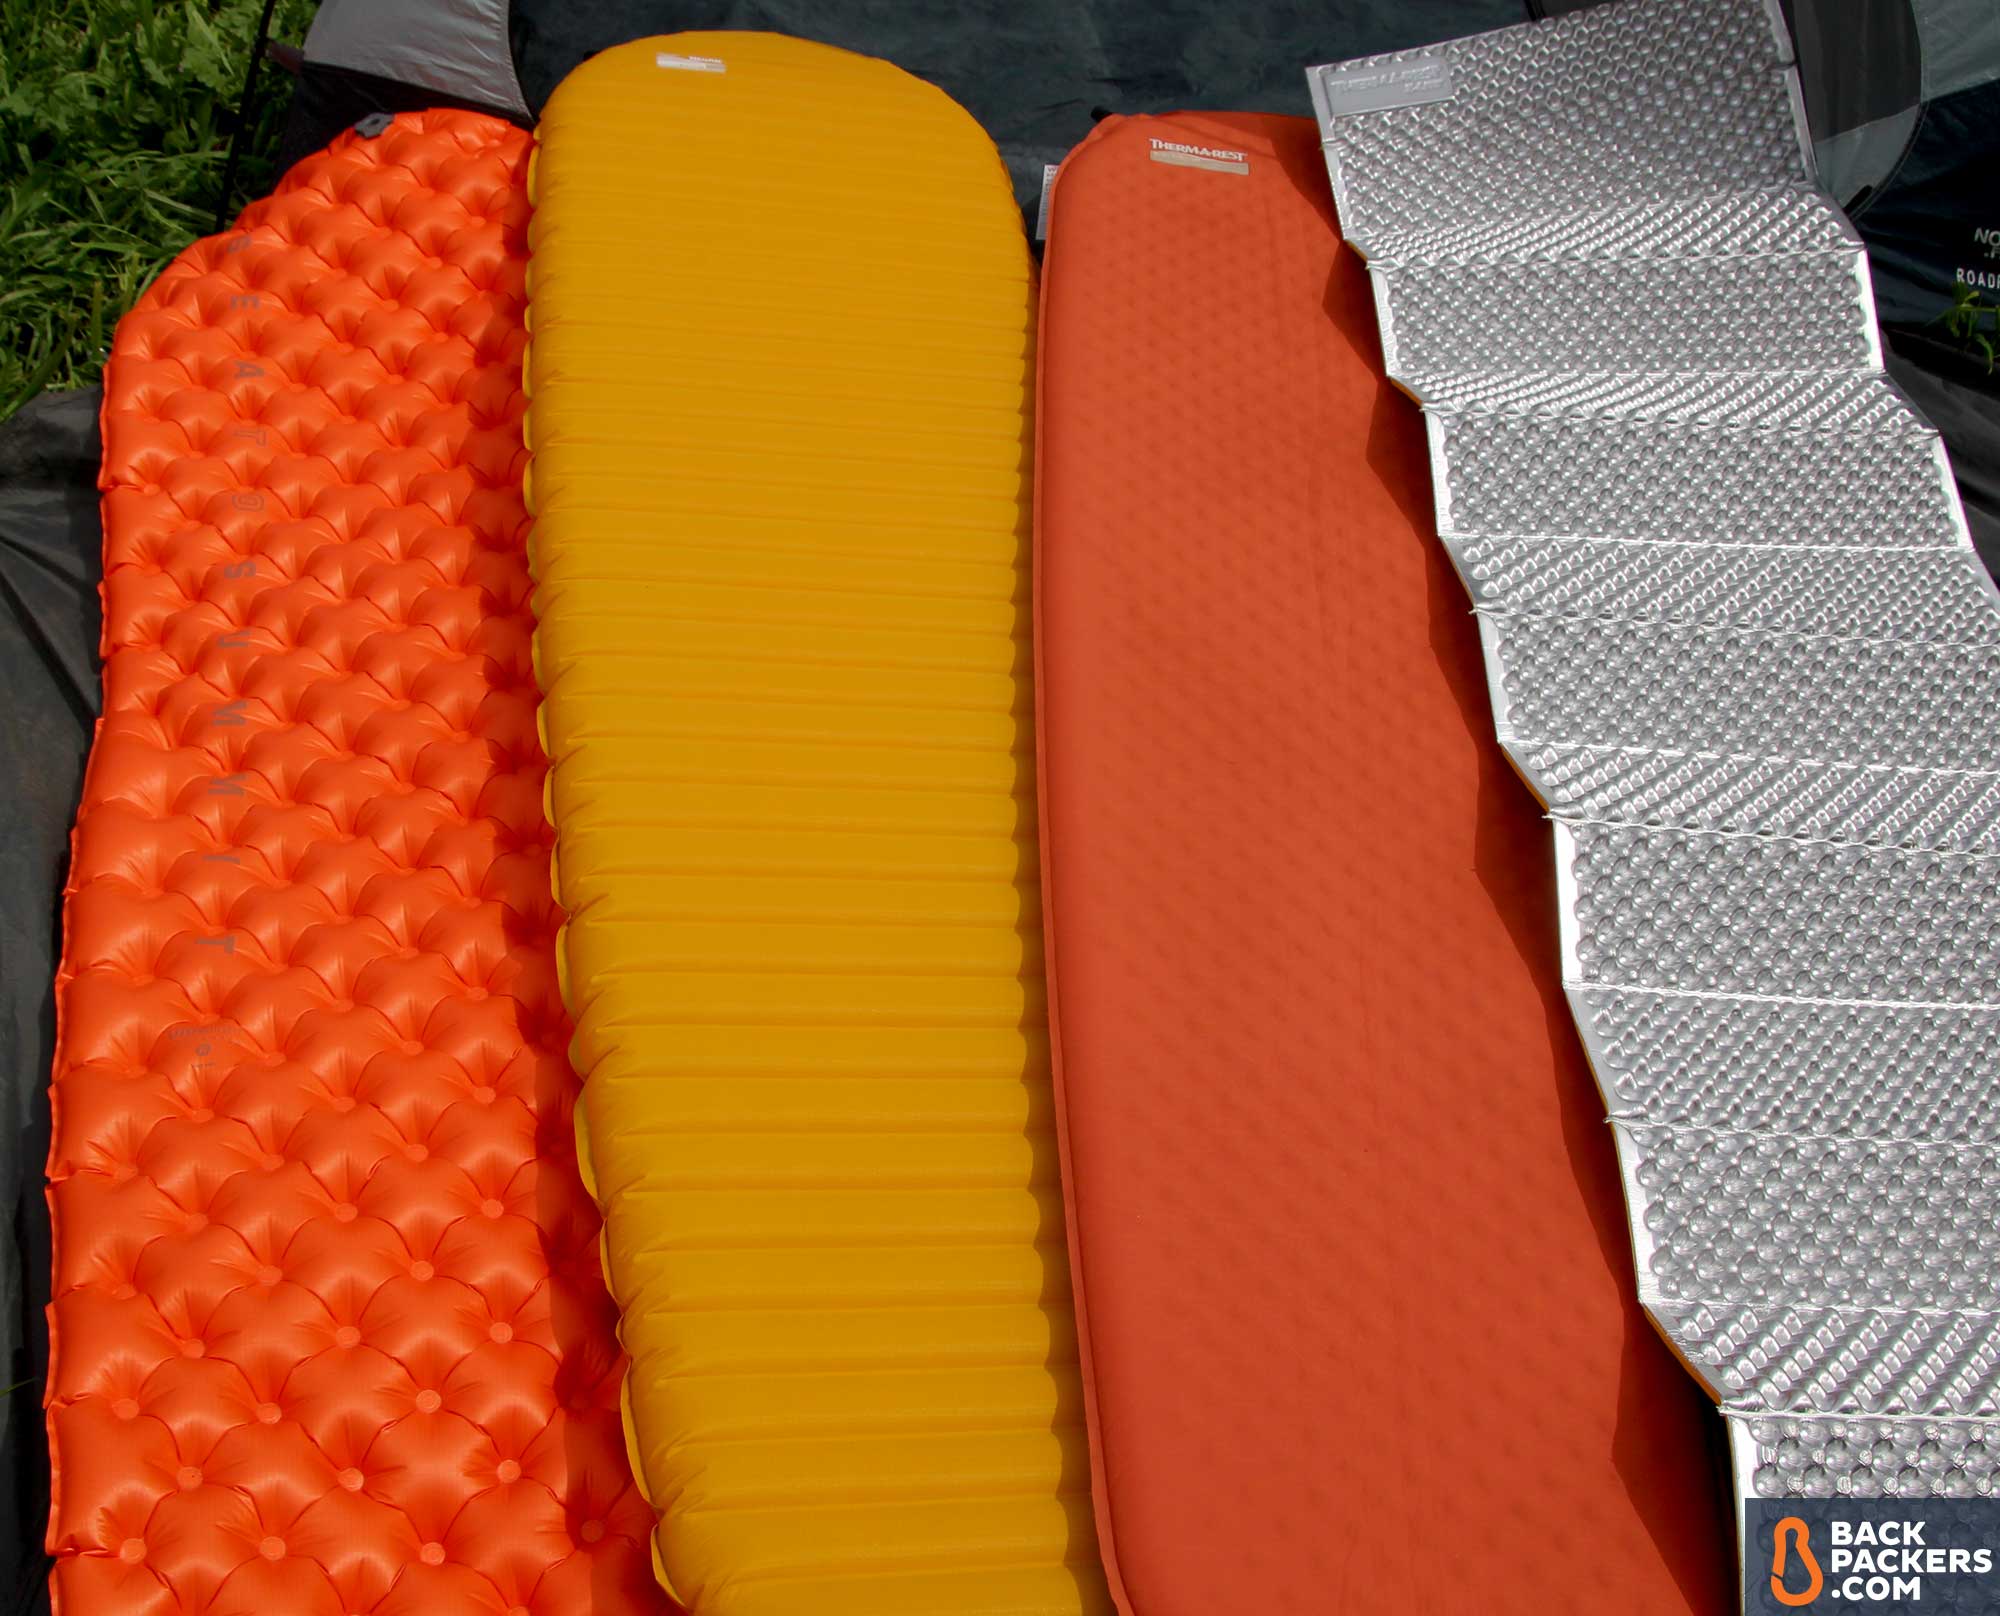 Sleeping Pad Guide | Outdoor Gear Guide 